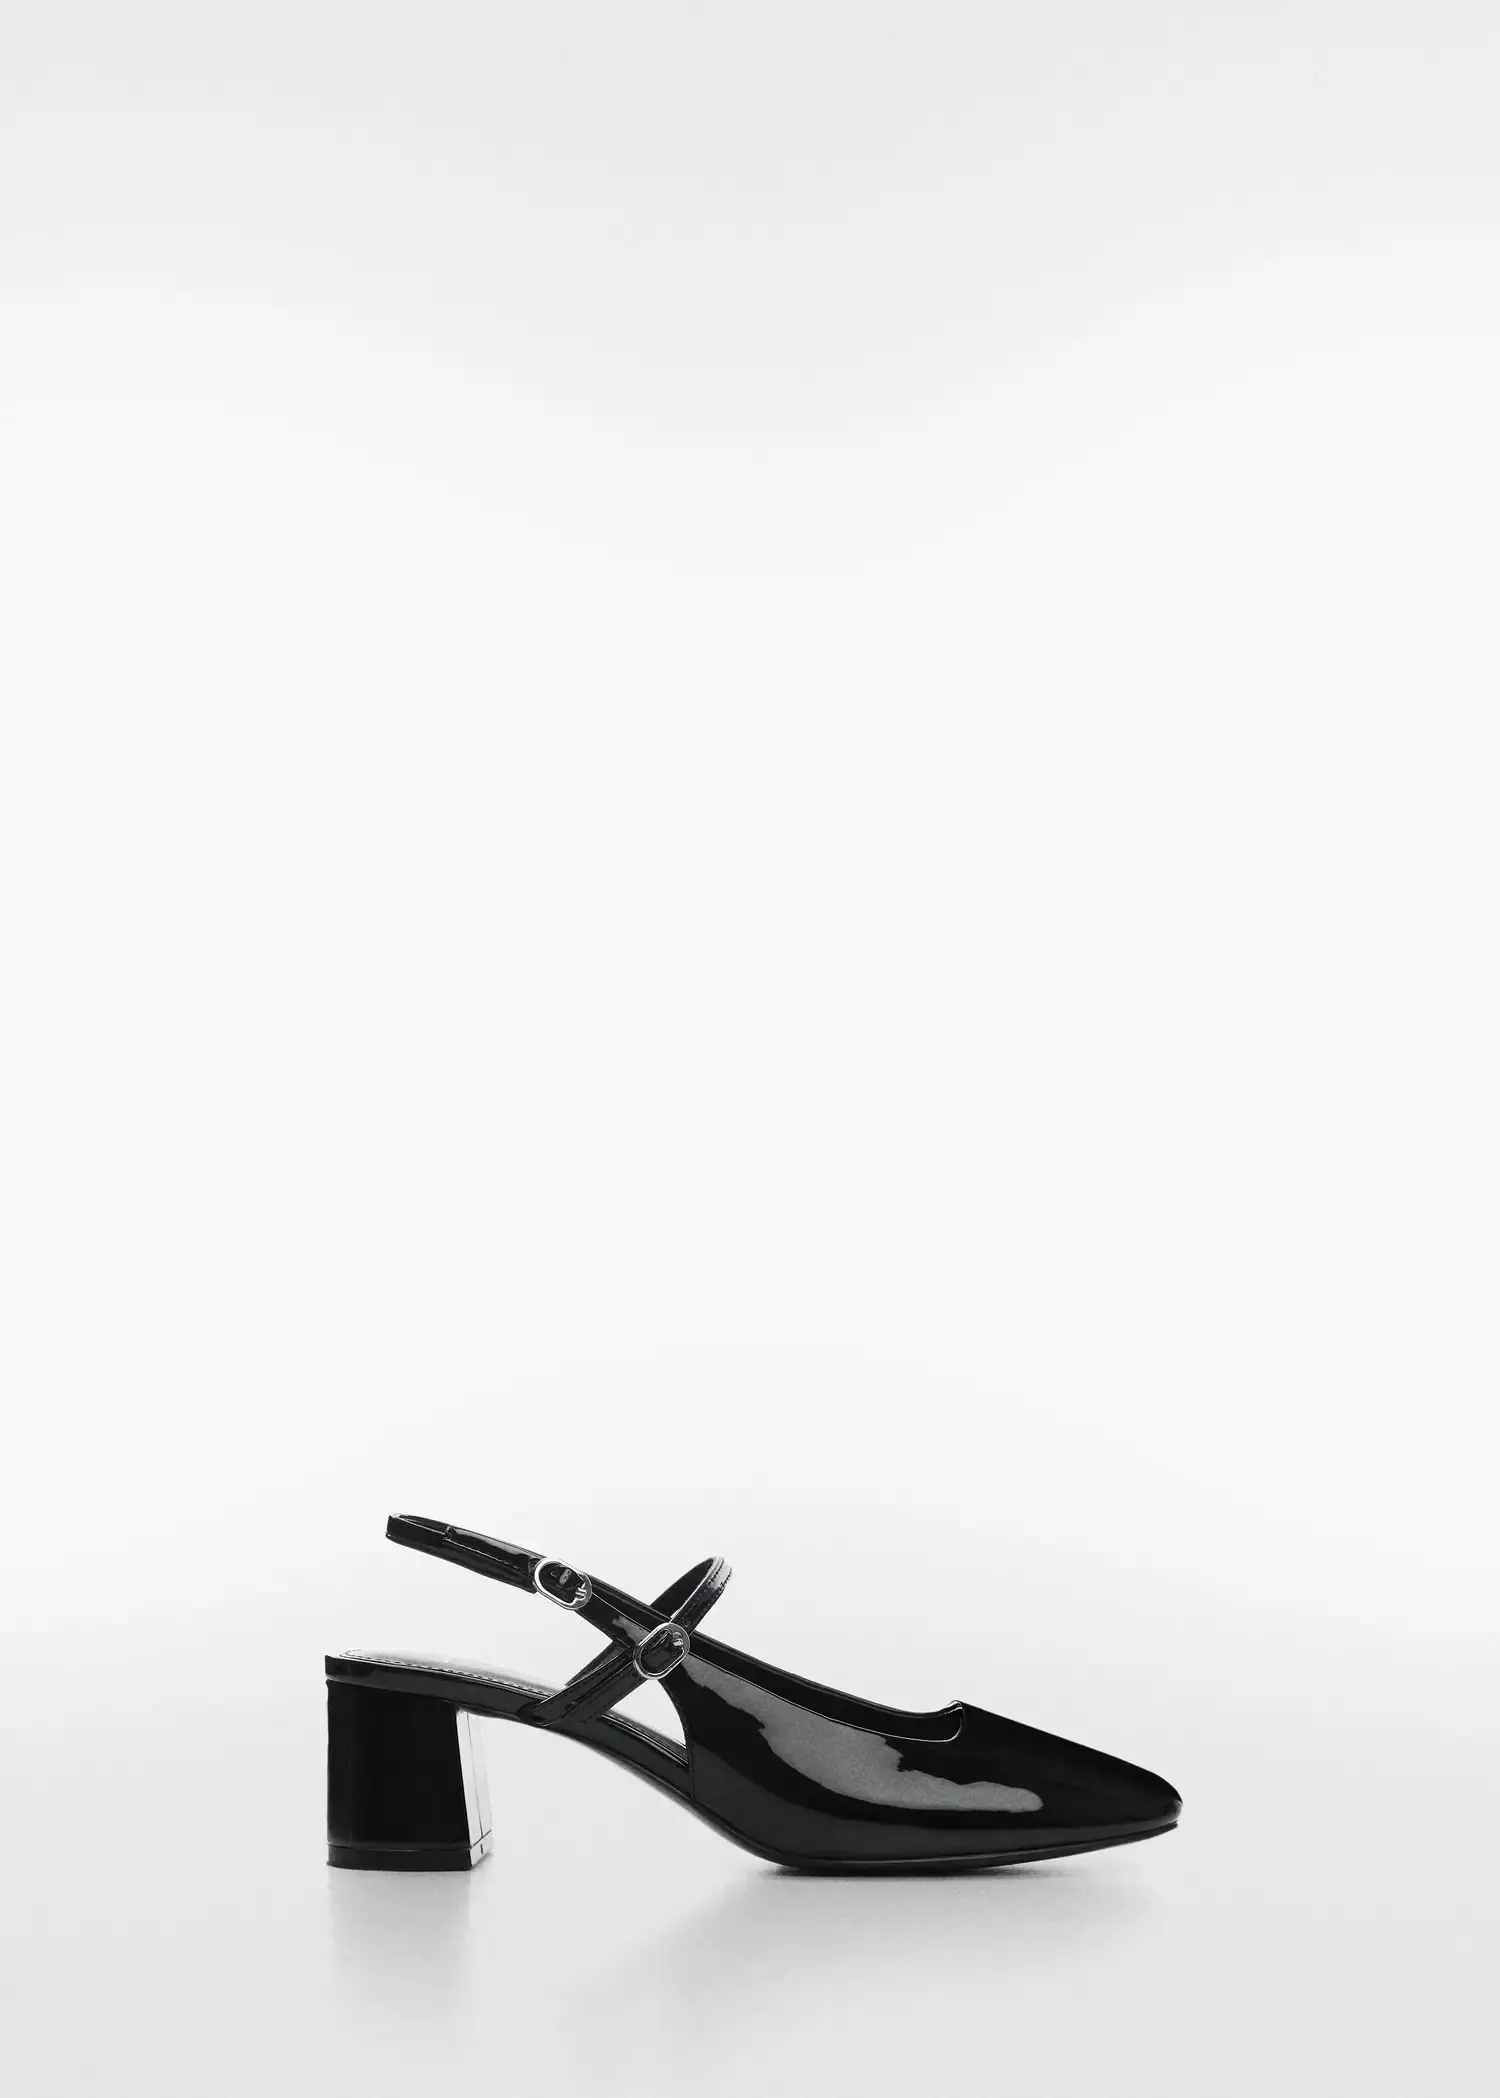 Mango Block heel shoe. a pair of black high heeled shoes on a white background. 